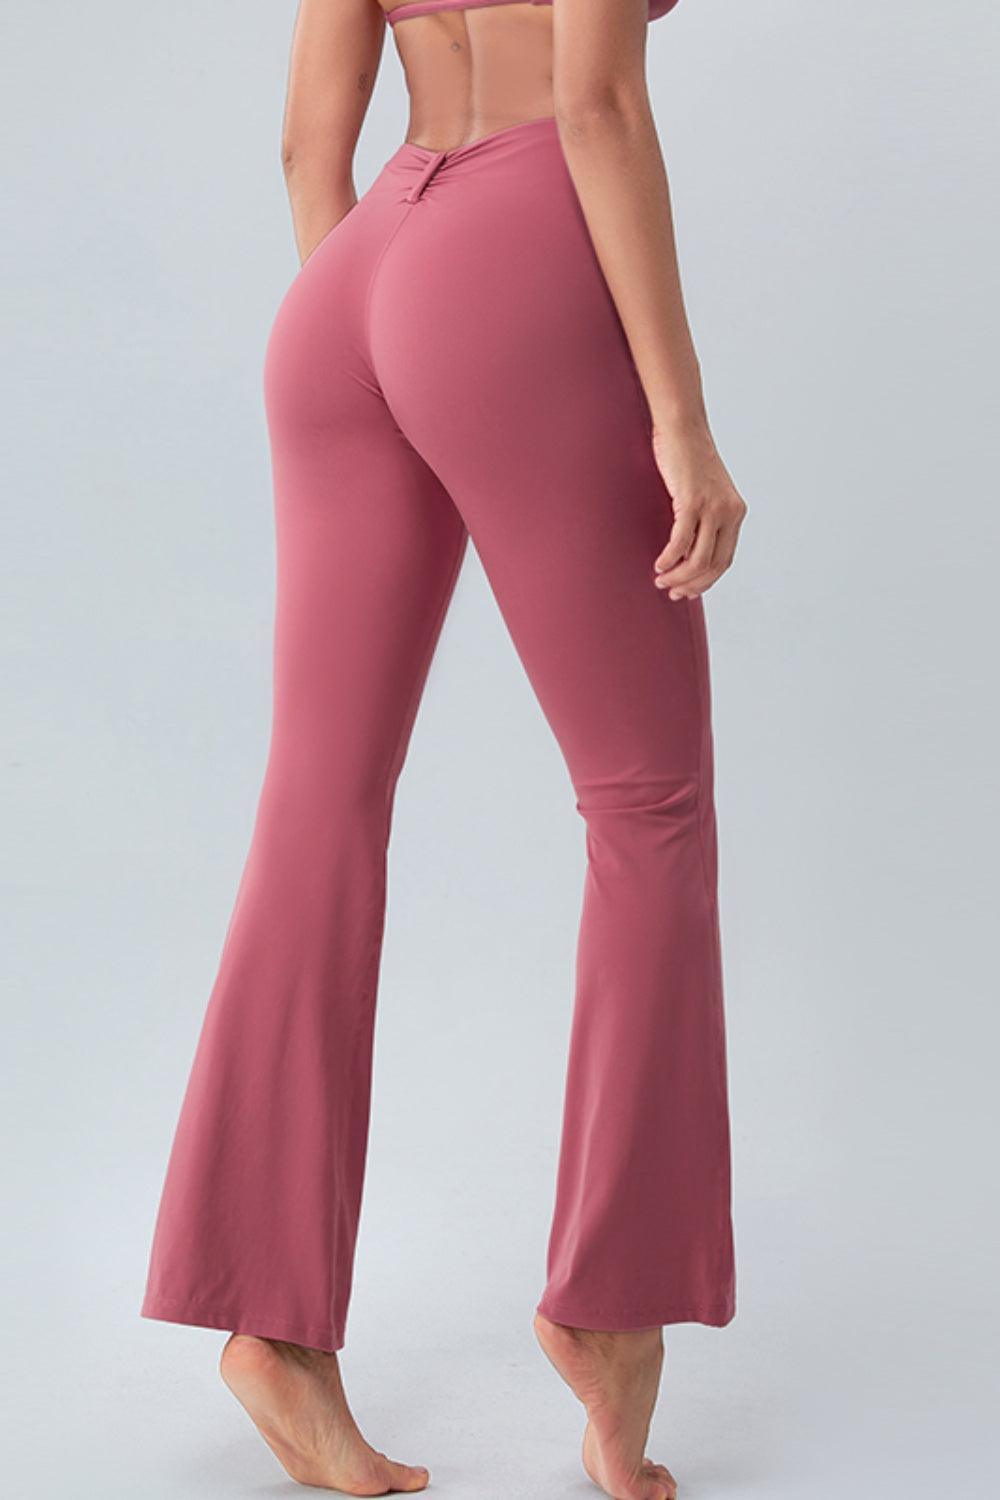 a woman in pink pants and a bra top